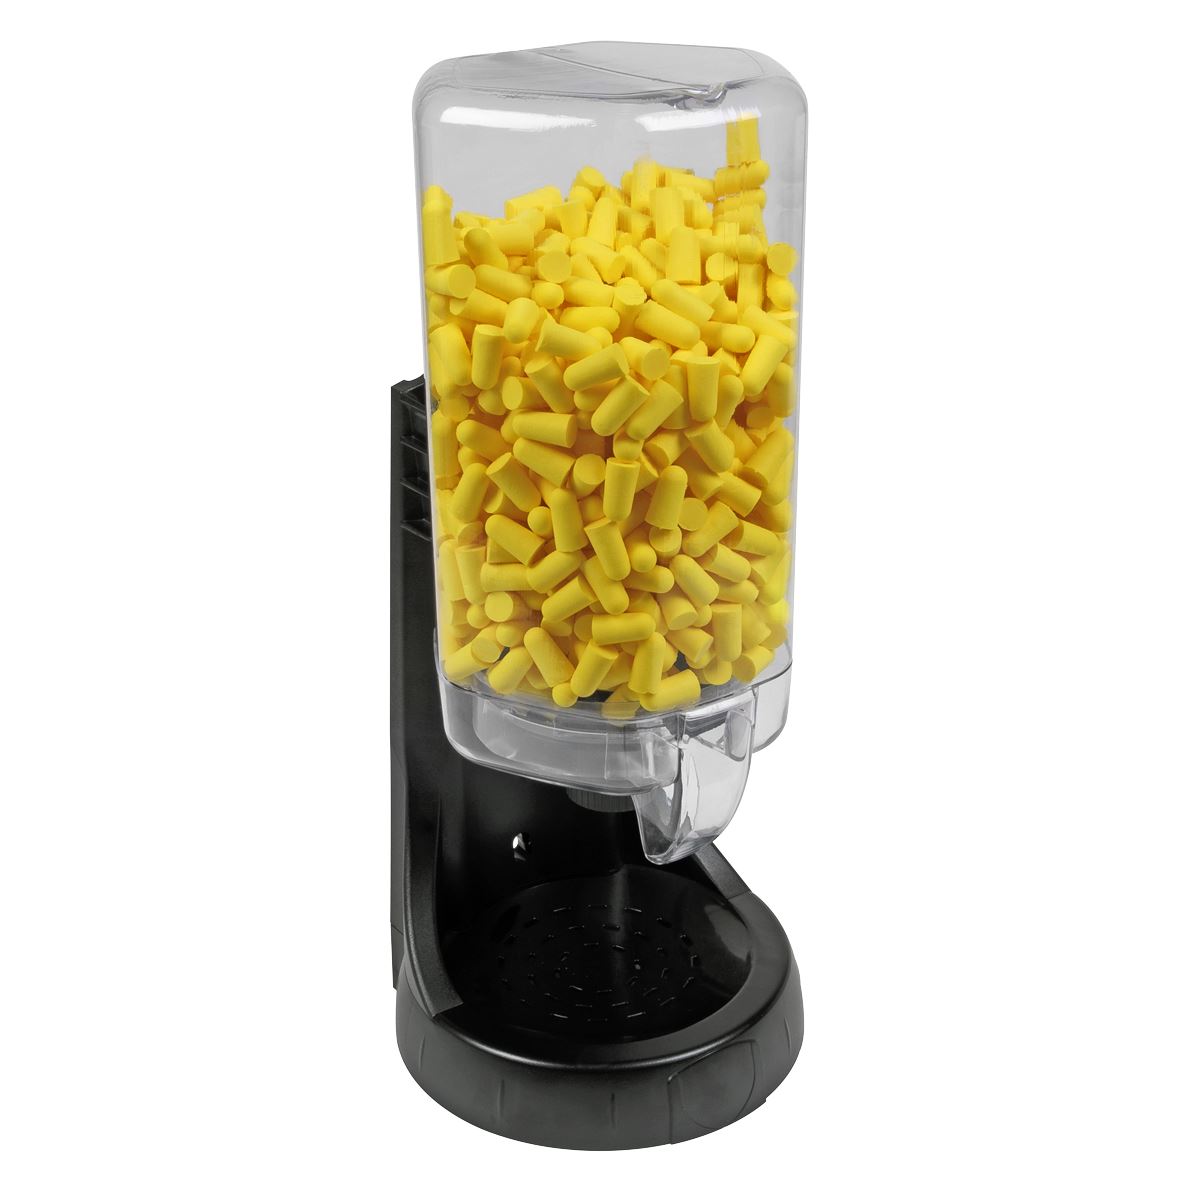 Worksafe by Sealey Ear Plugs Dispenser Disposable - 500 Pairs